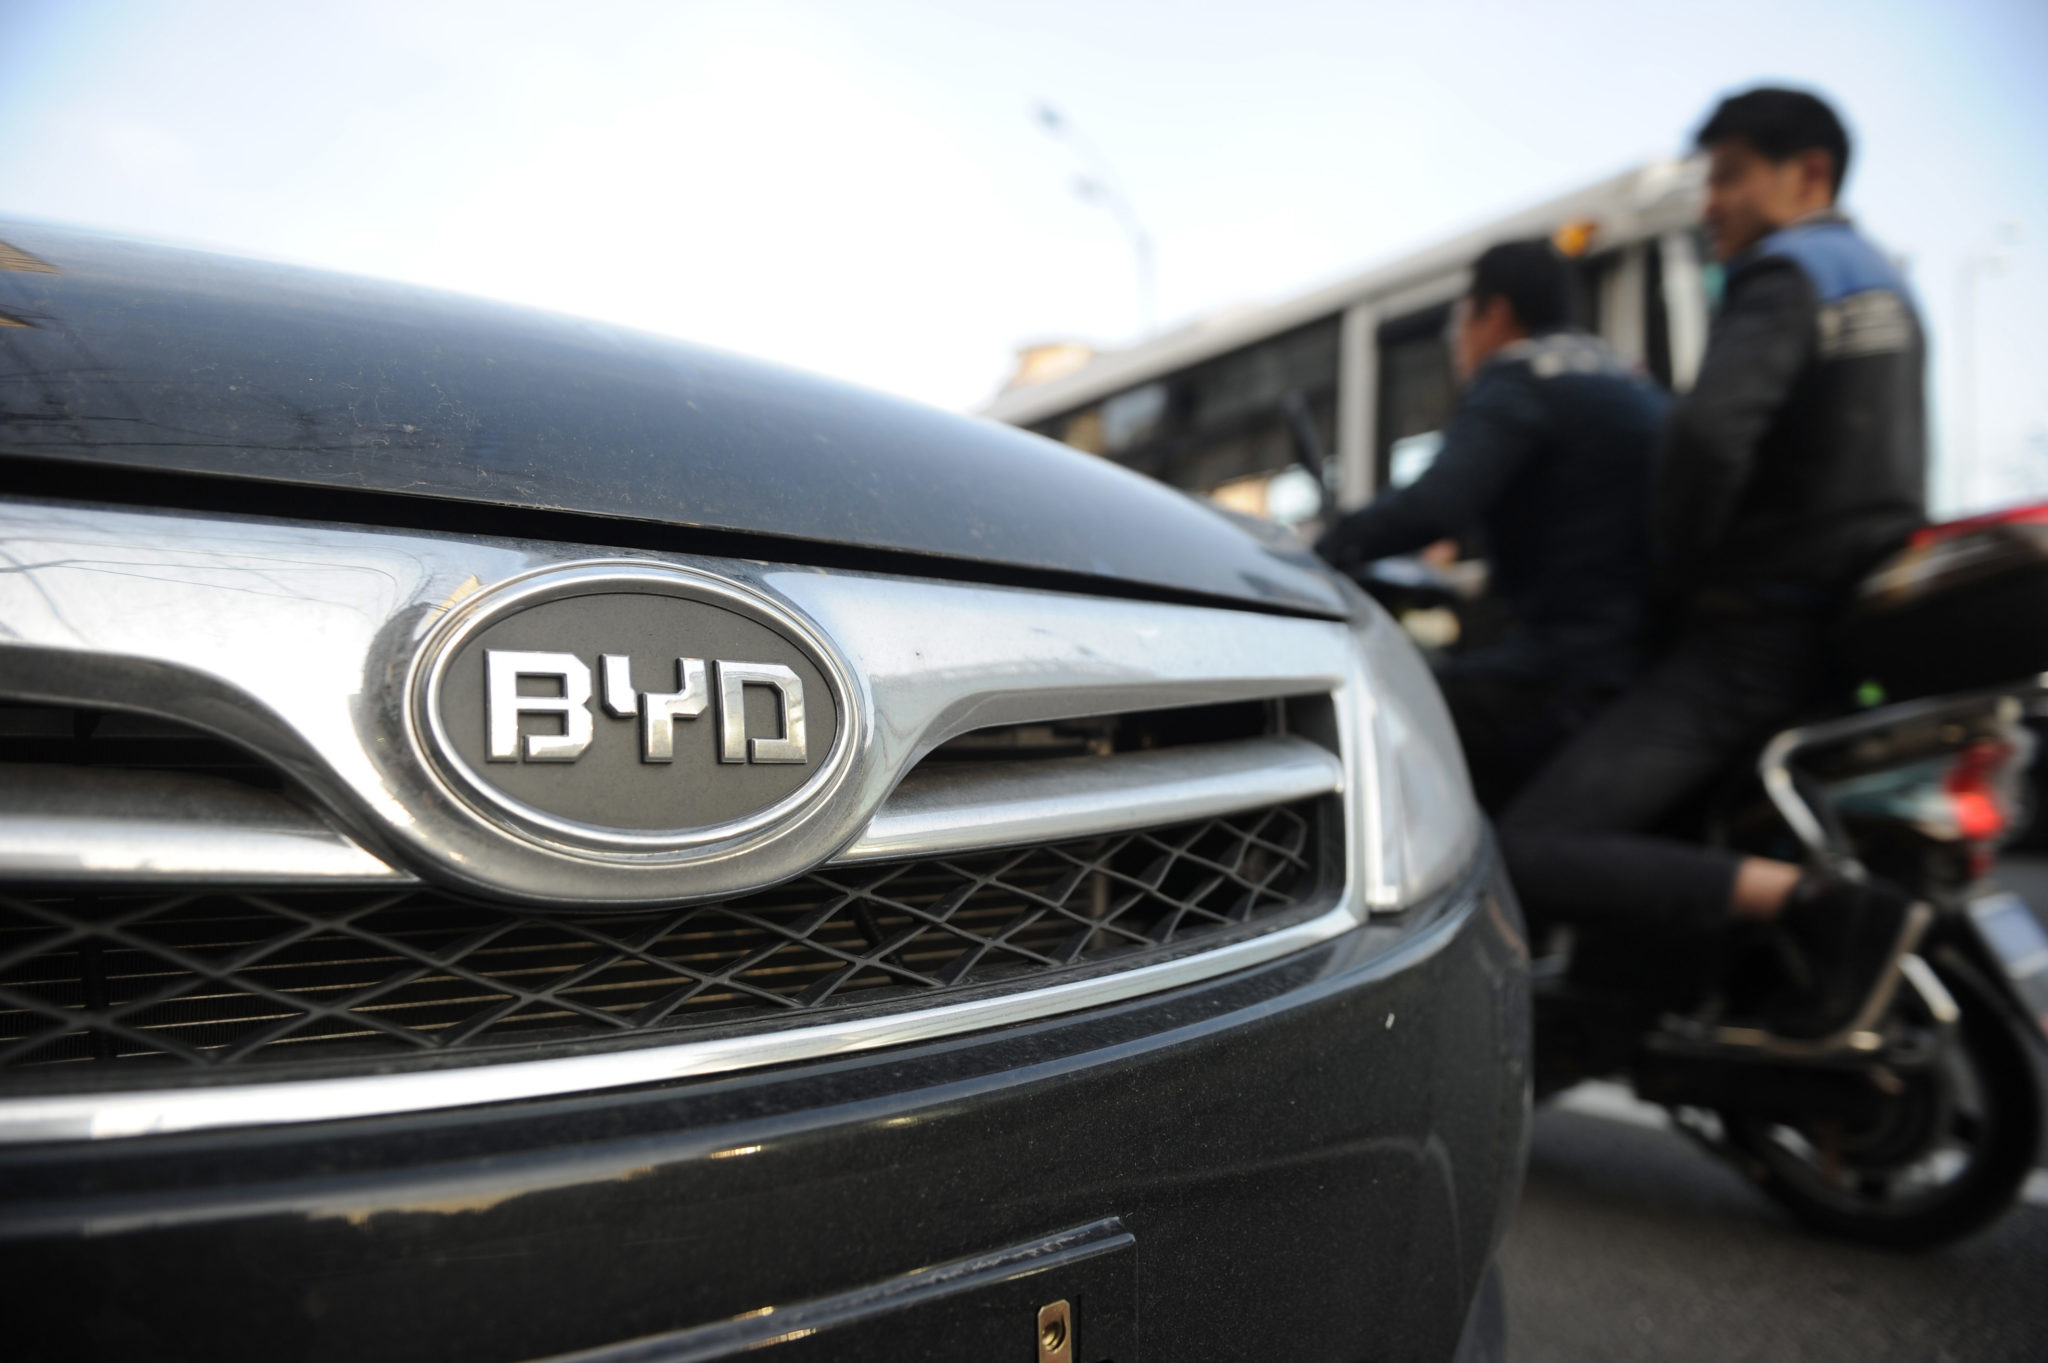 Chinese electric carmaker BYD net profit surged 632 per cent in Q1